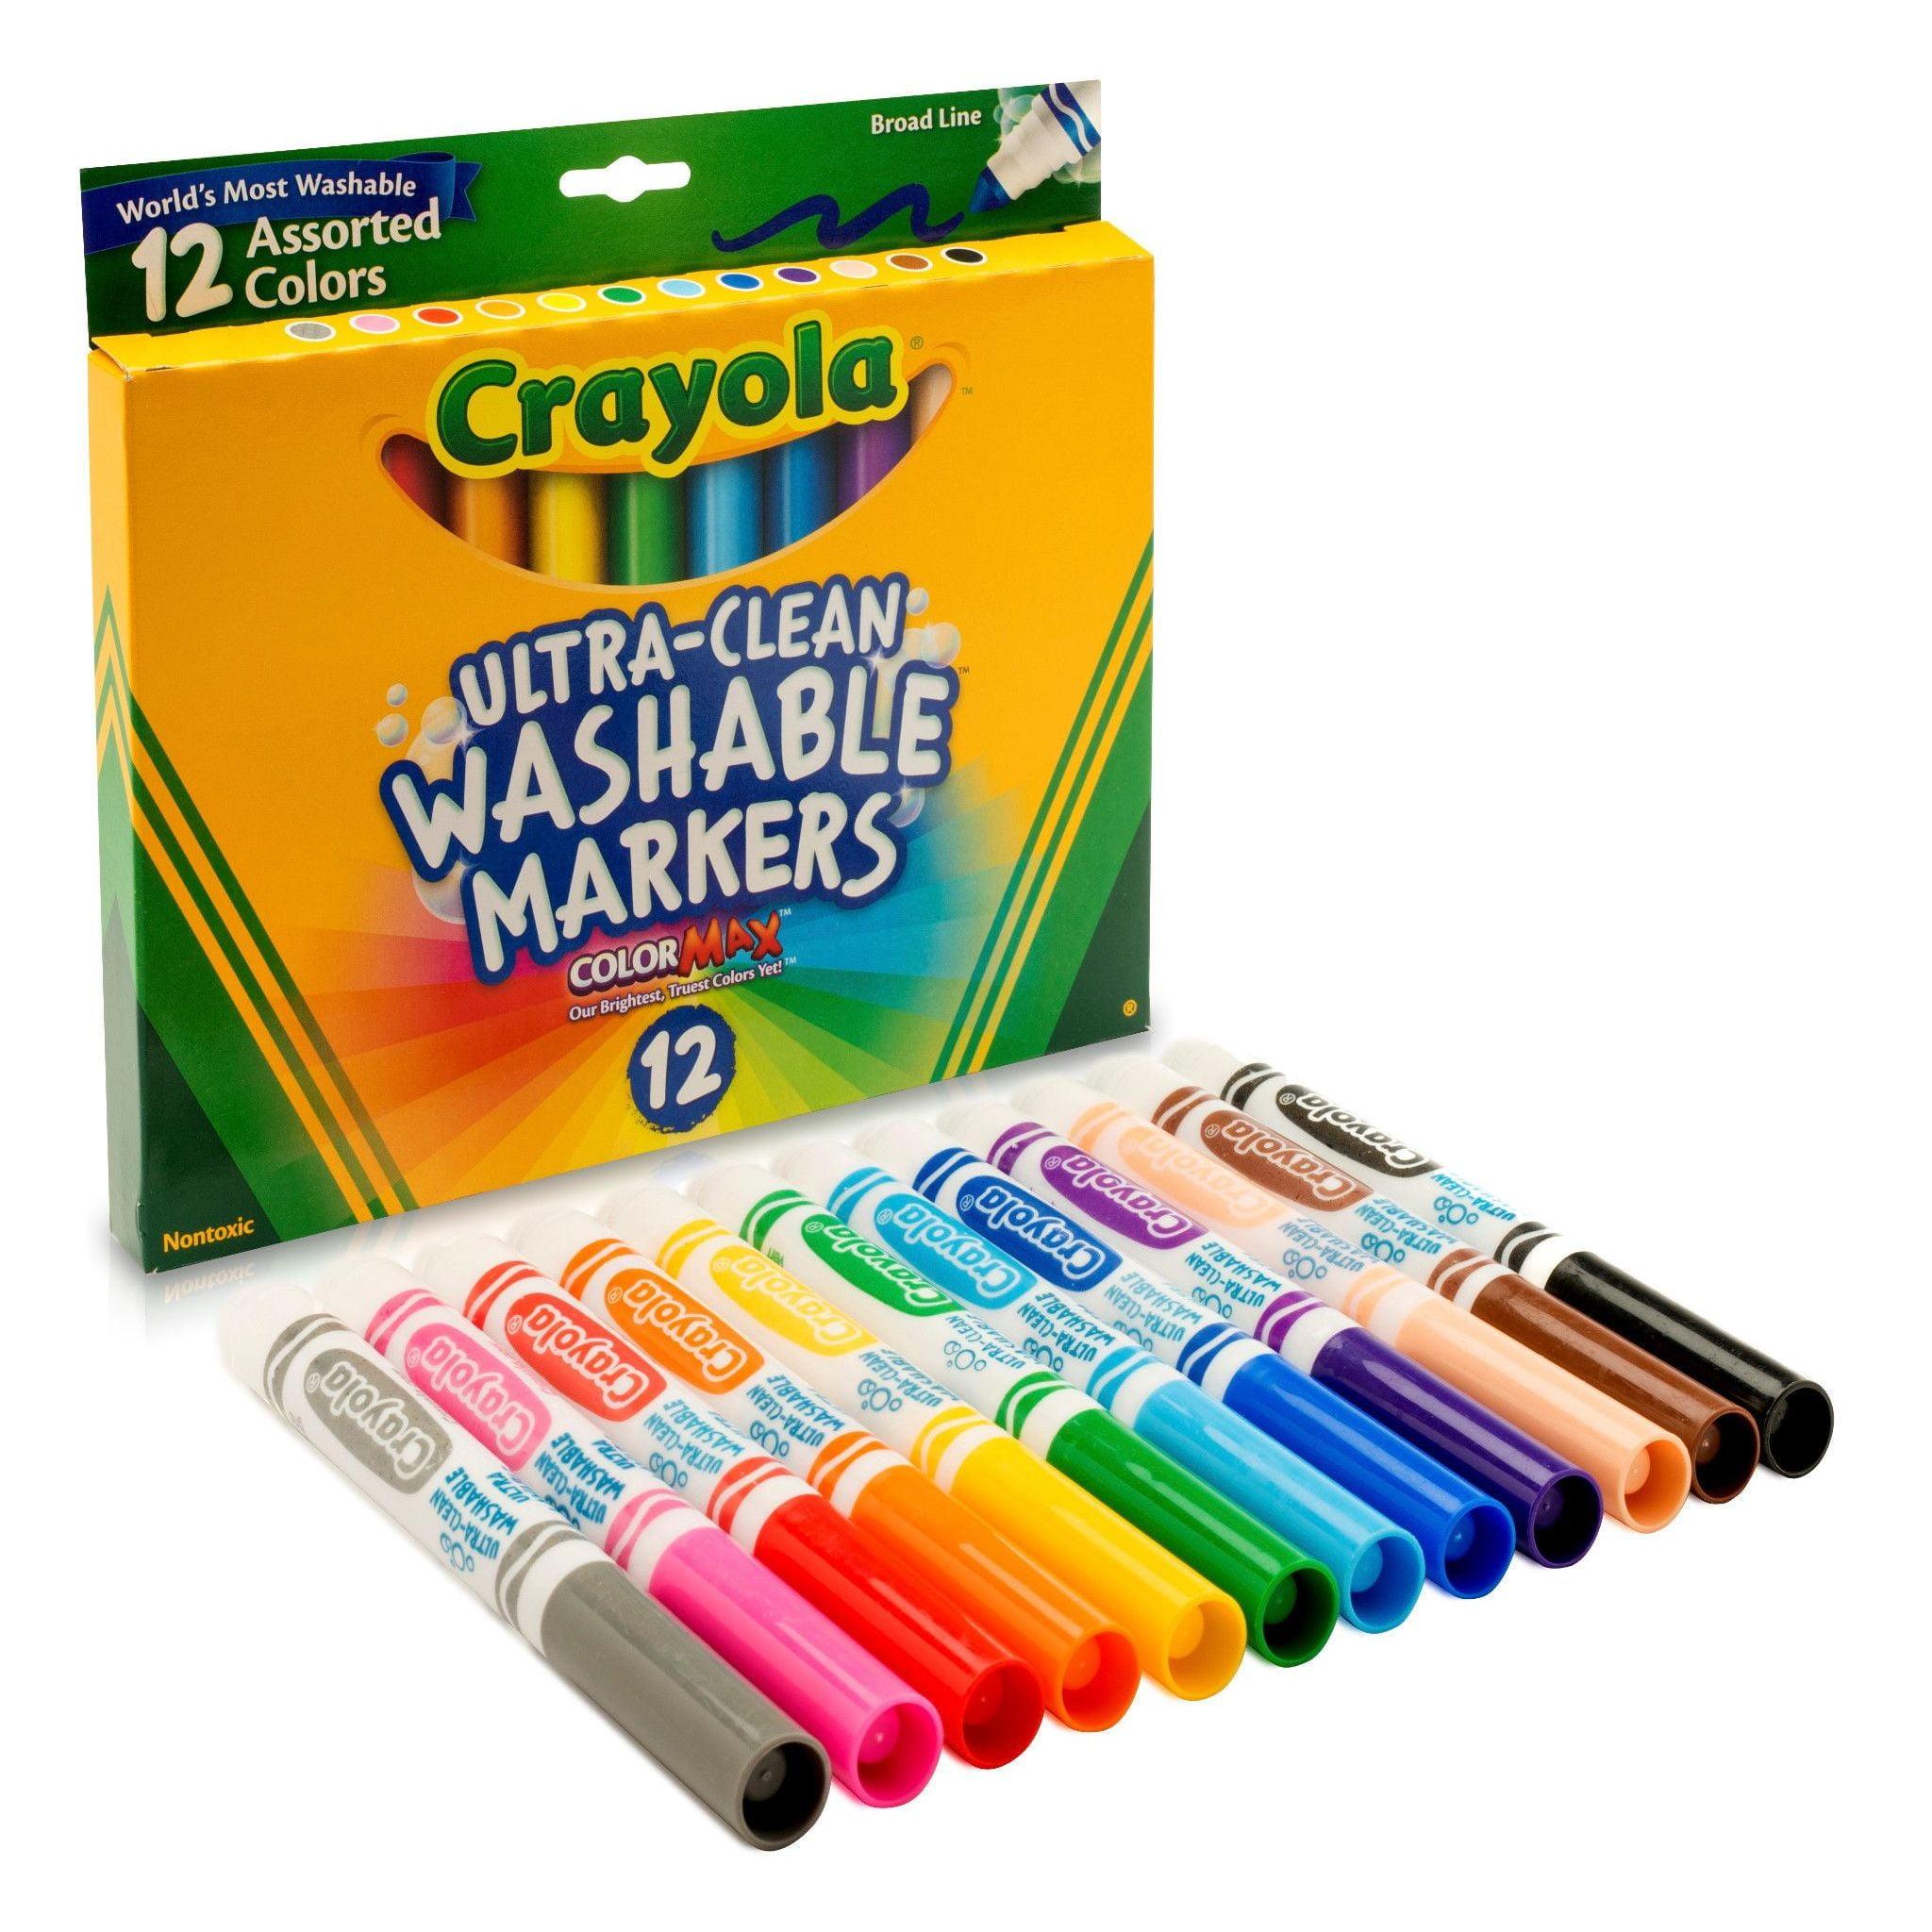 Crayola MARKERS Free Shipping Buy 1 Get 1 25% Off! Add 2 to Cart 